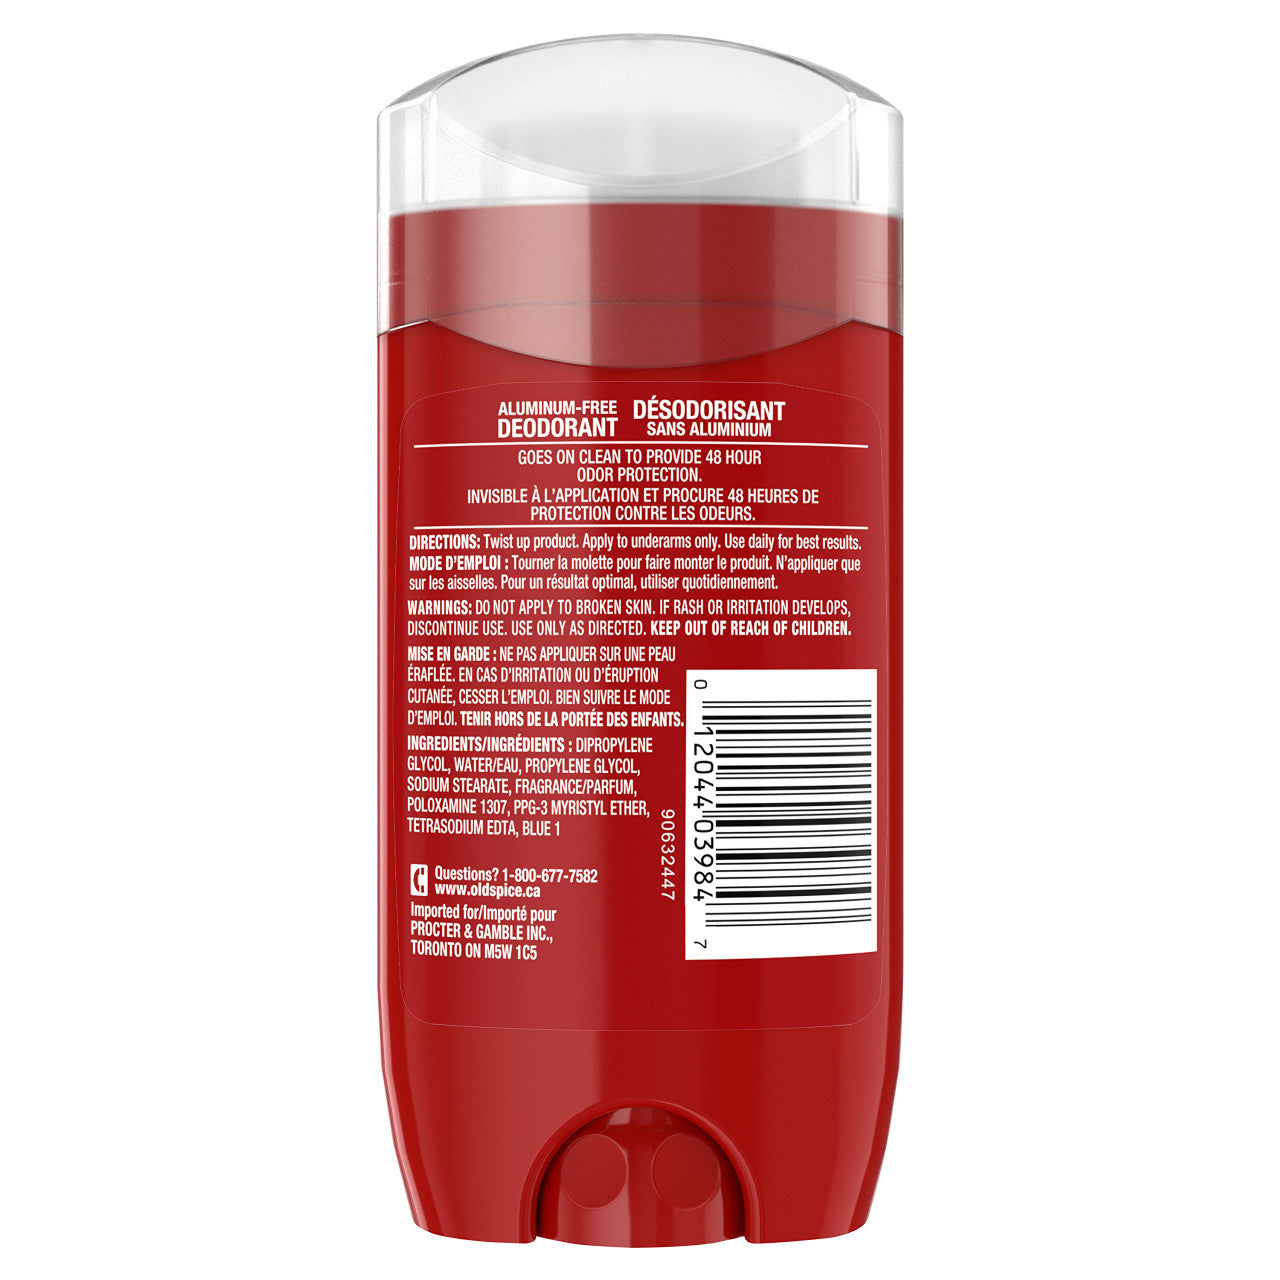 Old Spice Red Zone Swagger Deodorant, 85g/3 oz.,  {Imported from Canada}